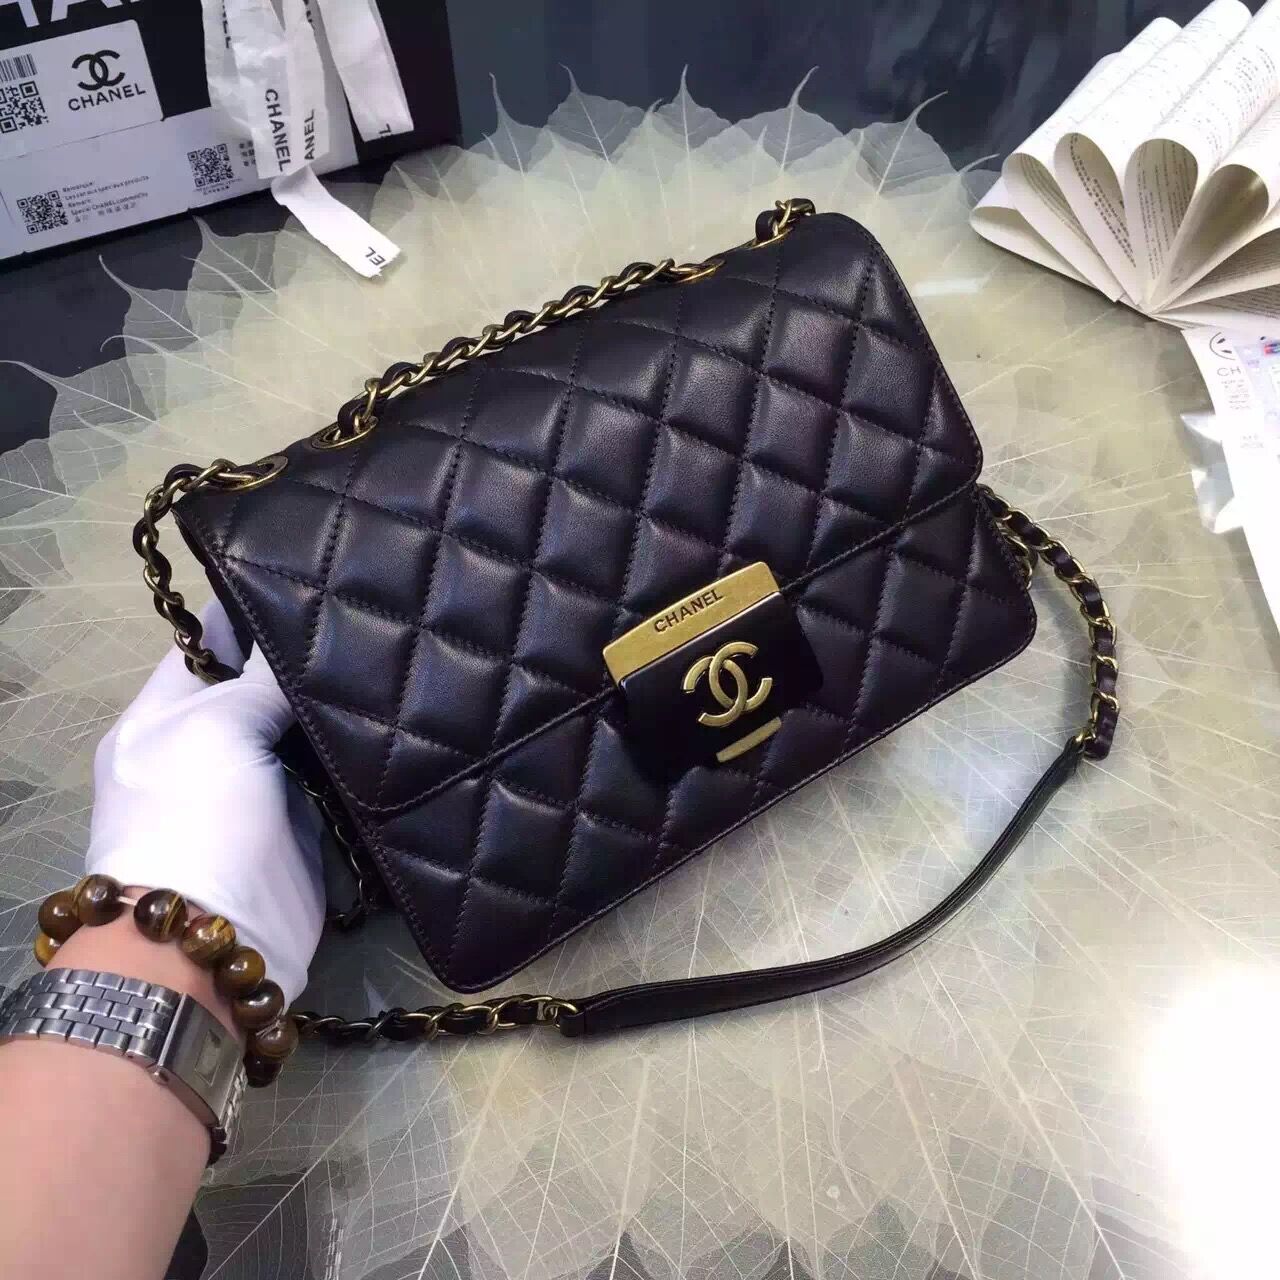 China top replica handbags forum: Top 2018 winter new arrival for hermes chanel bags from China